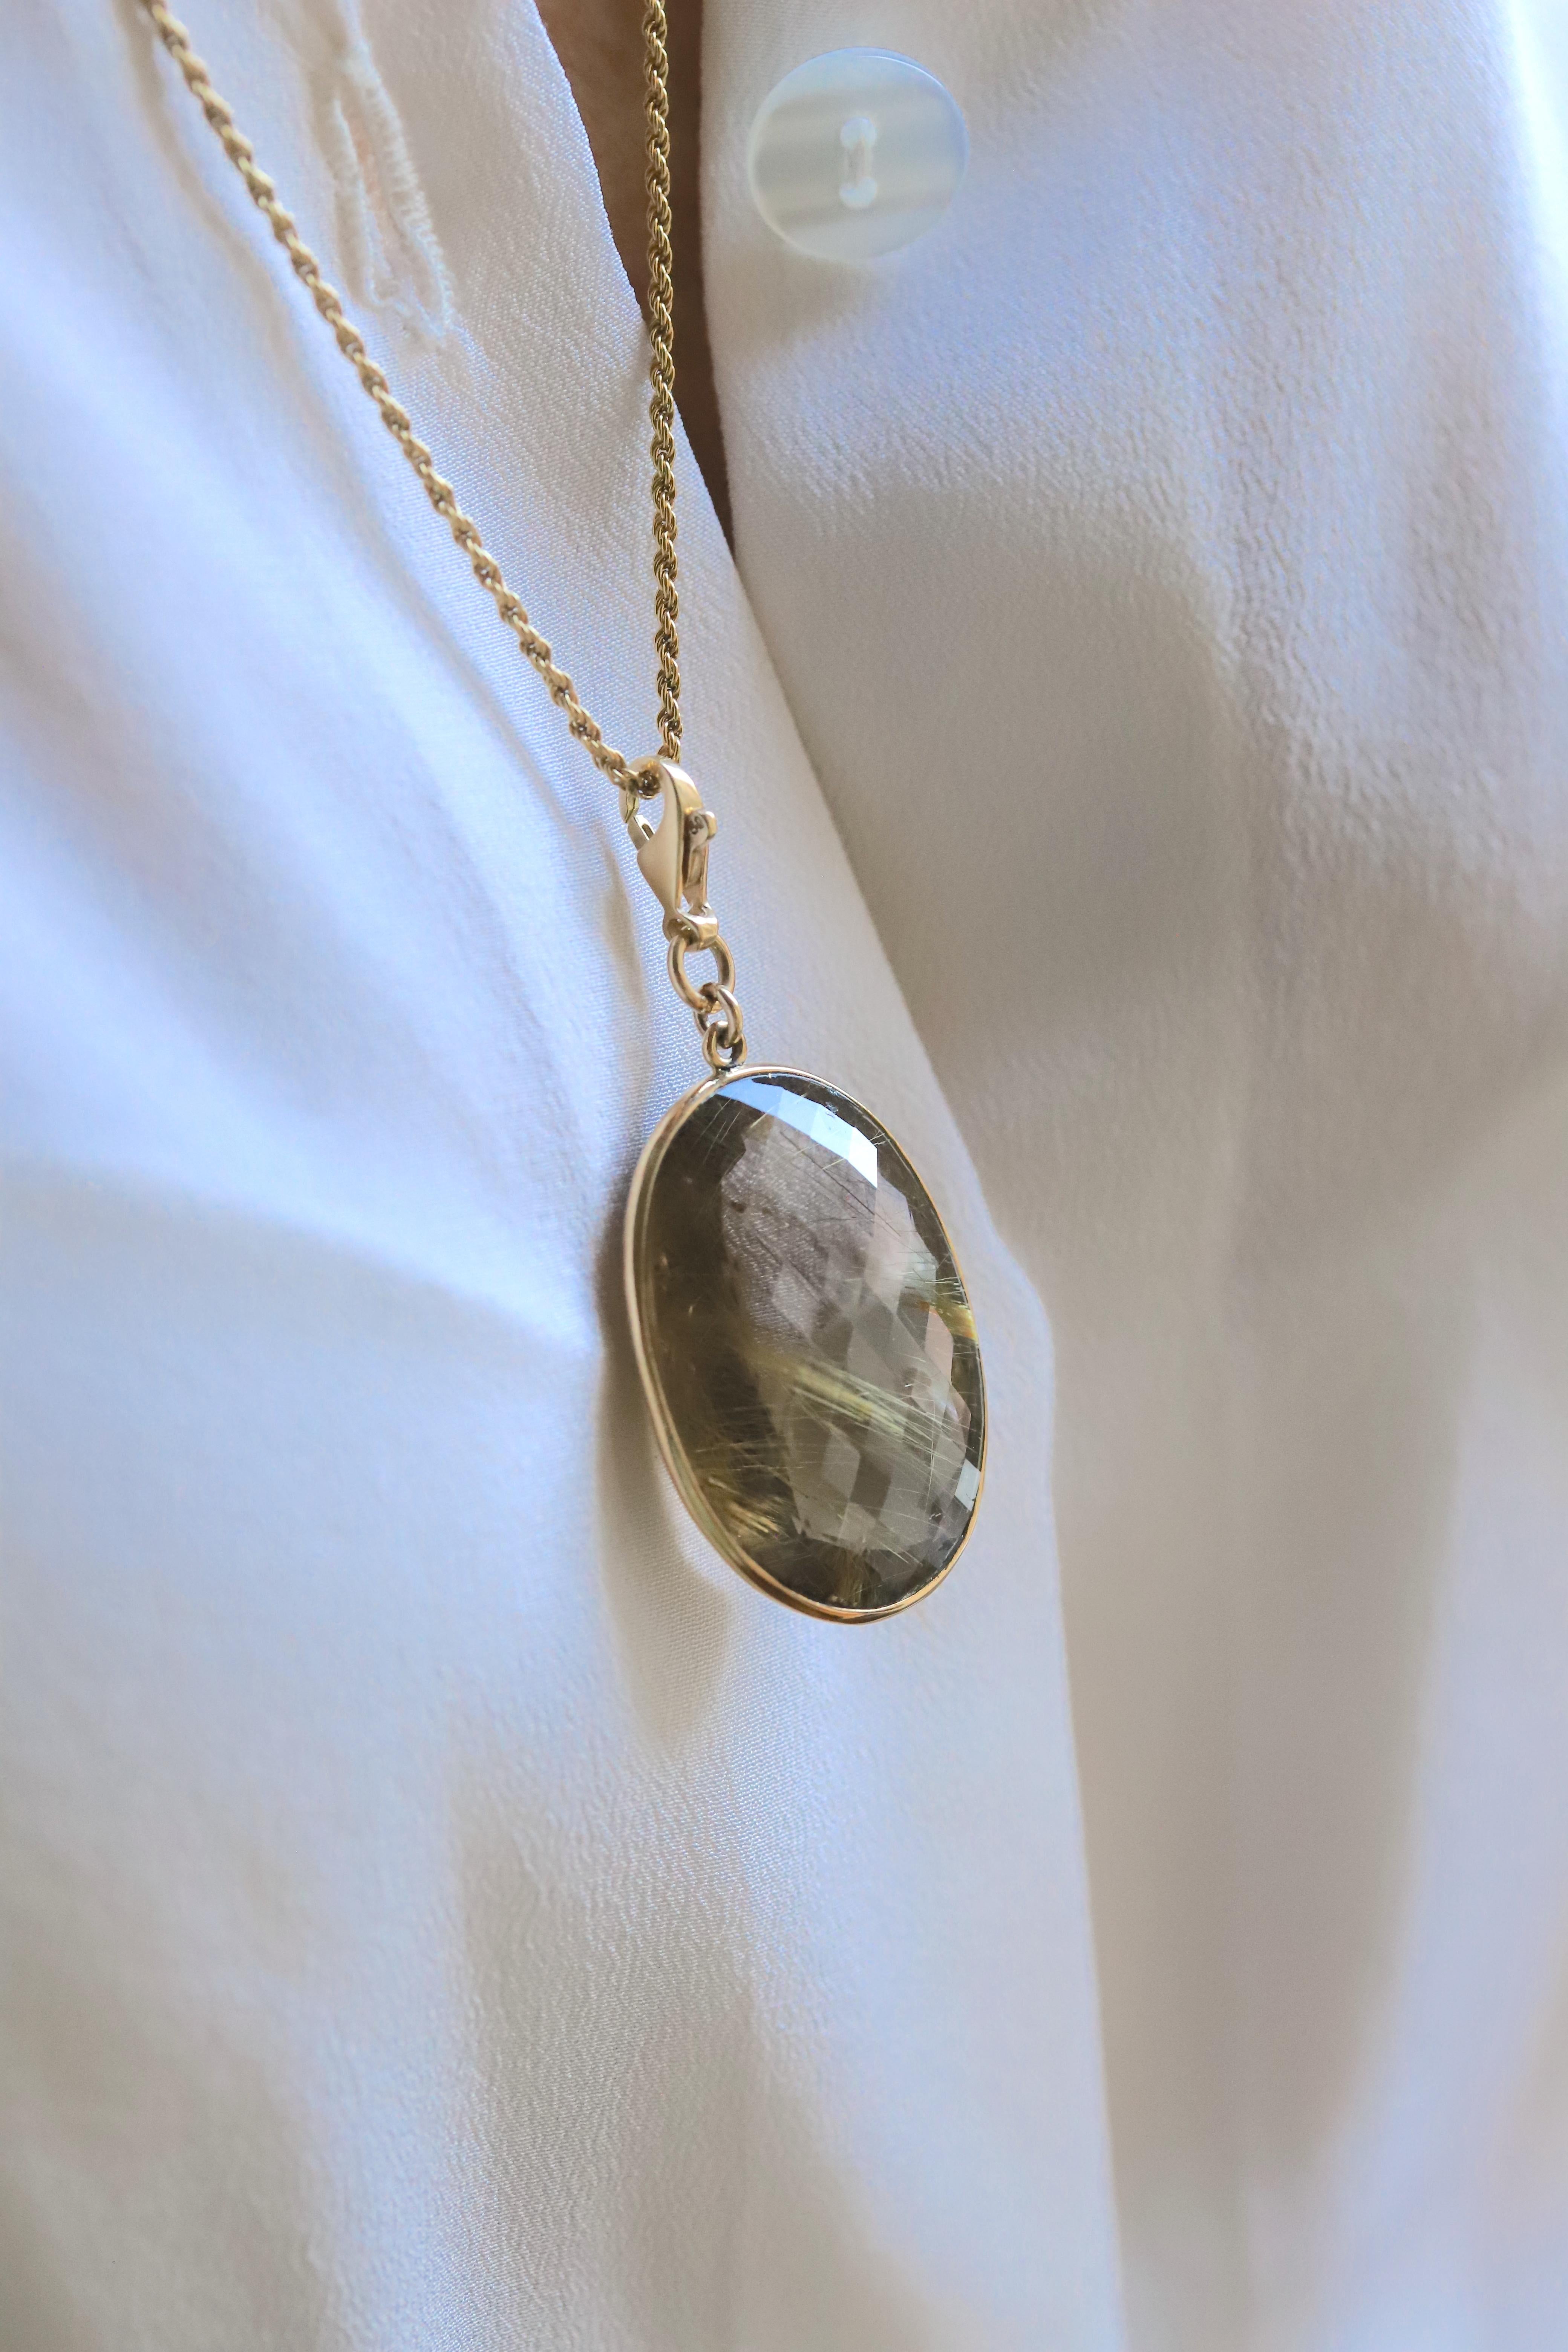 Rossella Ugolini Design Collection, One-of-a-kind  Rutilated Quartz Oval cut Charm set on a 18 Karat Yellow Gold bezel hang on a 18K Yellow Gold chain Necklace.
Dimension: Oval Rutilated Quartz  W. 0.40 In x H. 1.18 In  (W. 2.5 x H. 3 cm) 
Chain